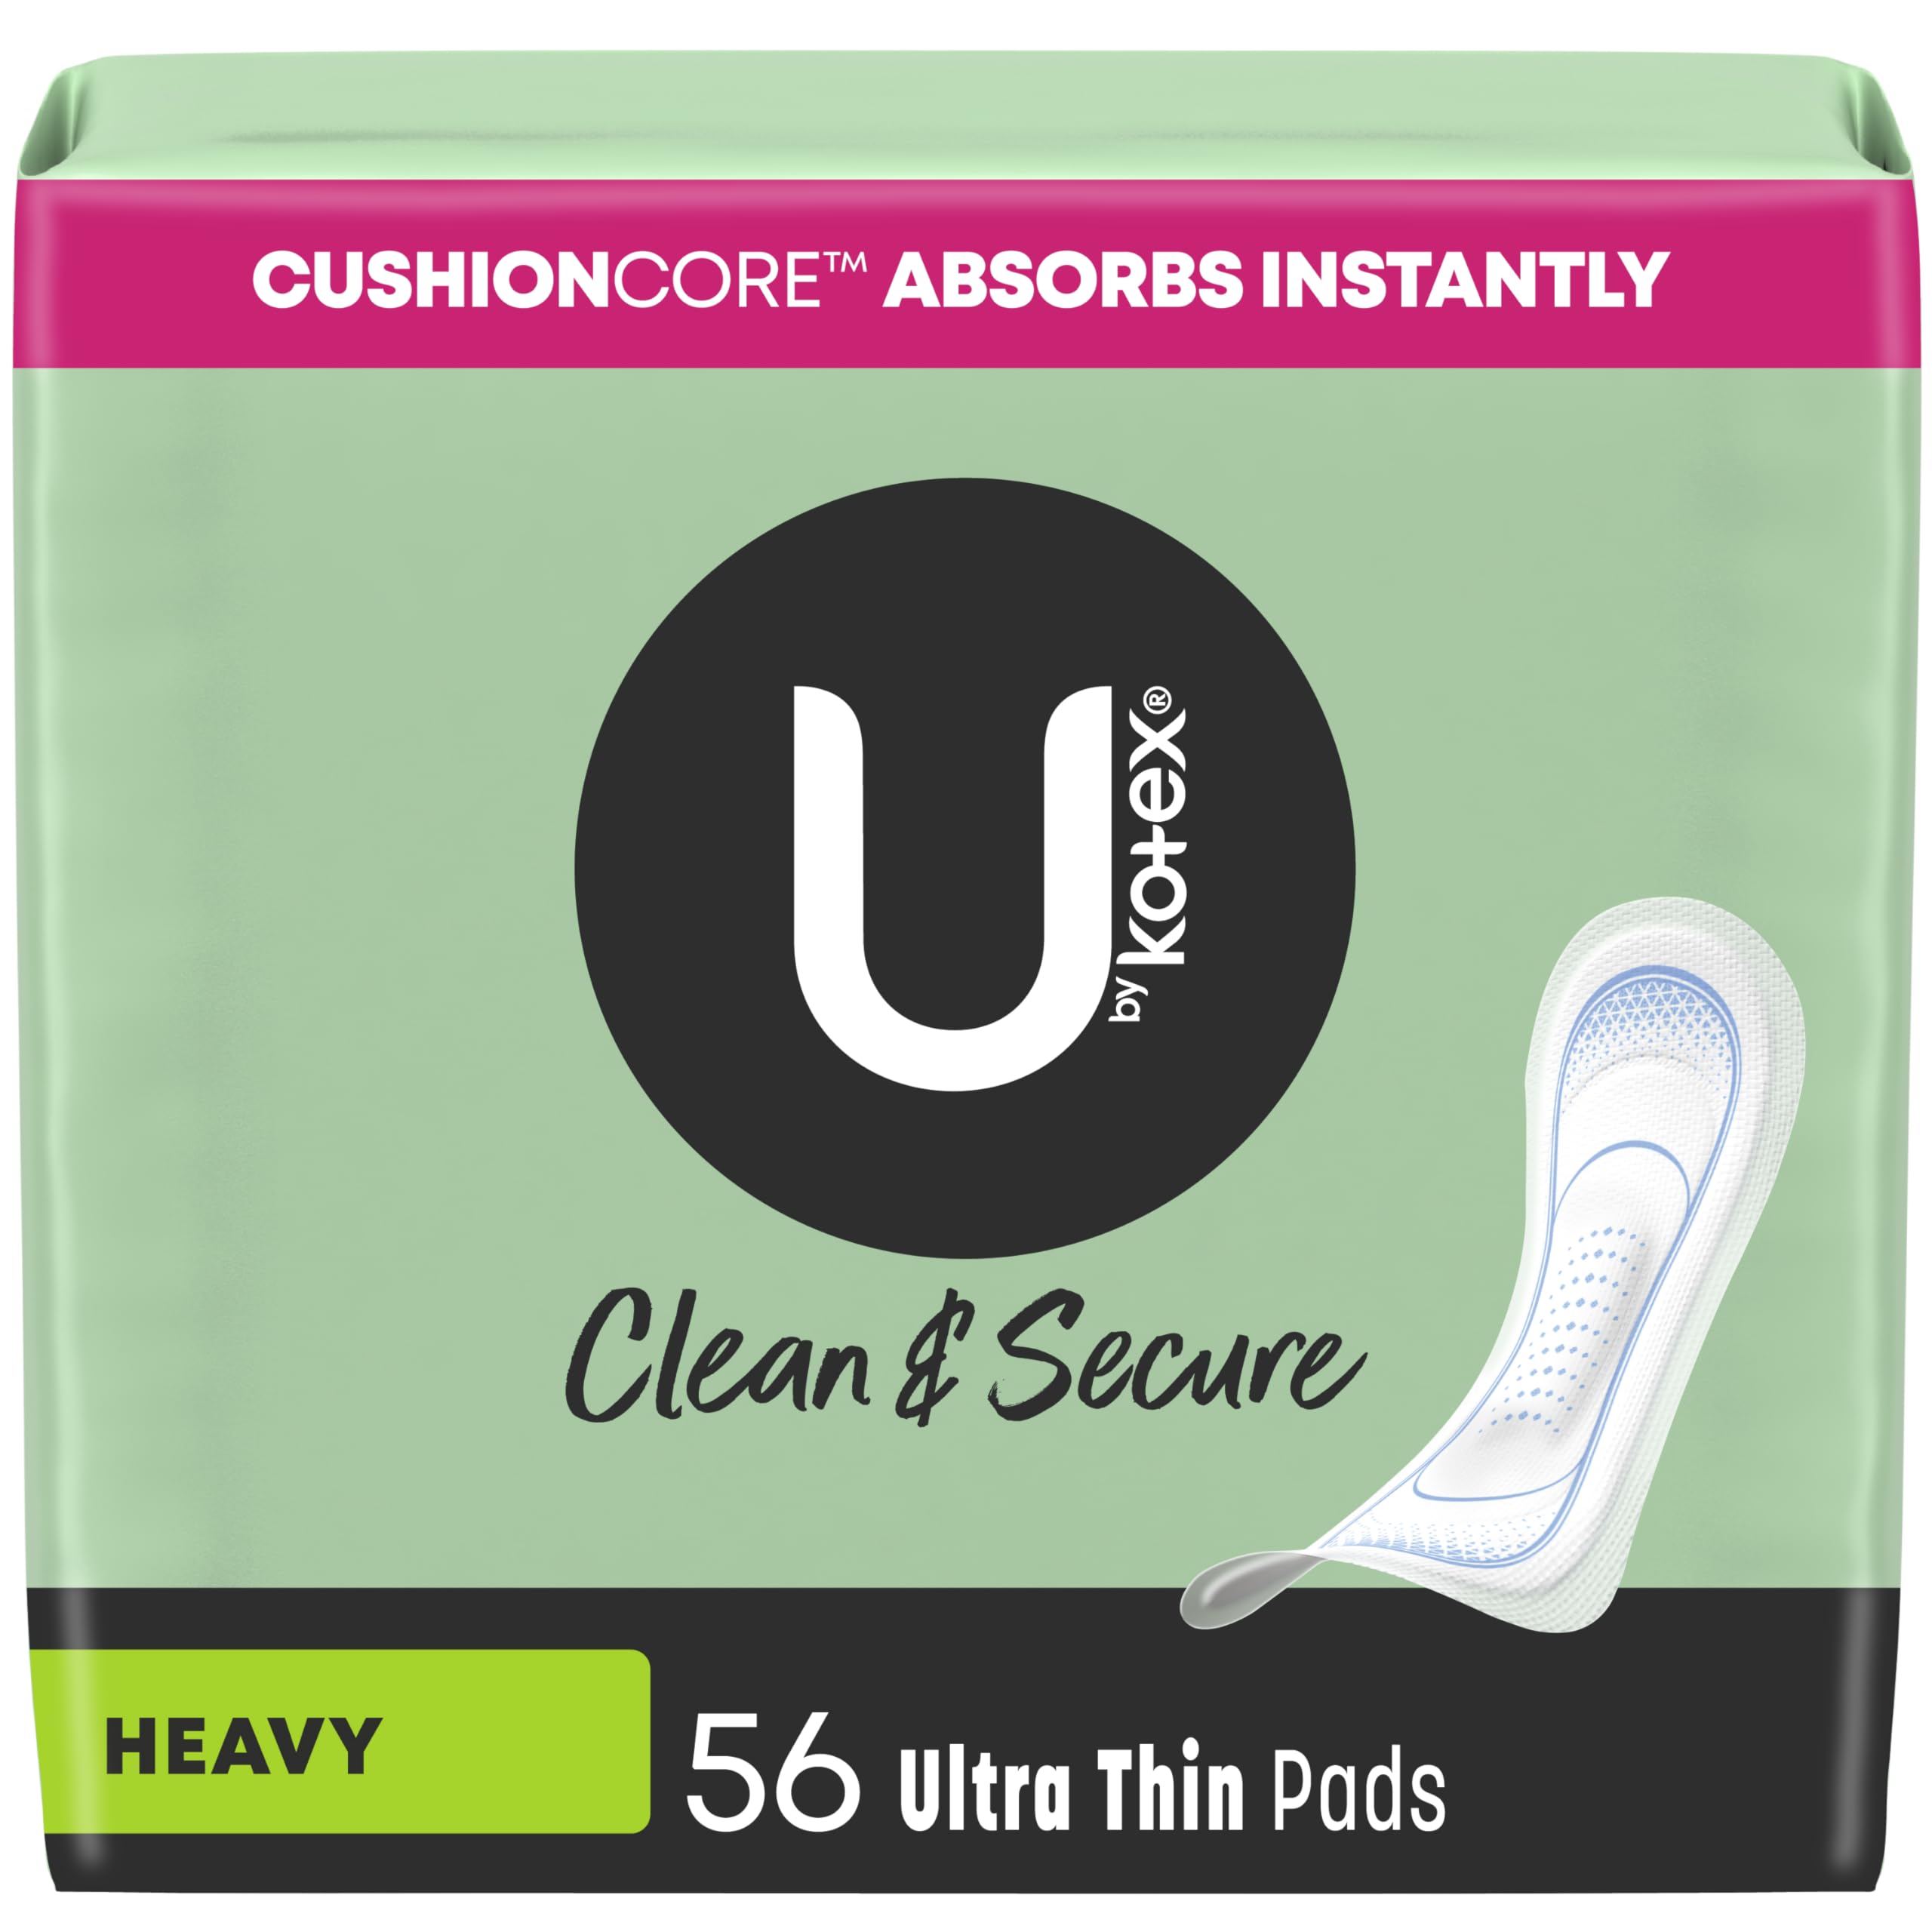 U by Kotex Clean & Secure Ultra Thin Pads (Heavy Absorbency): 56-Count $5.13, 240-Count $20.93 + $2.80 Amazon Credit w/ S&S + F/S w/ Prime or on $35+